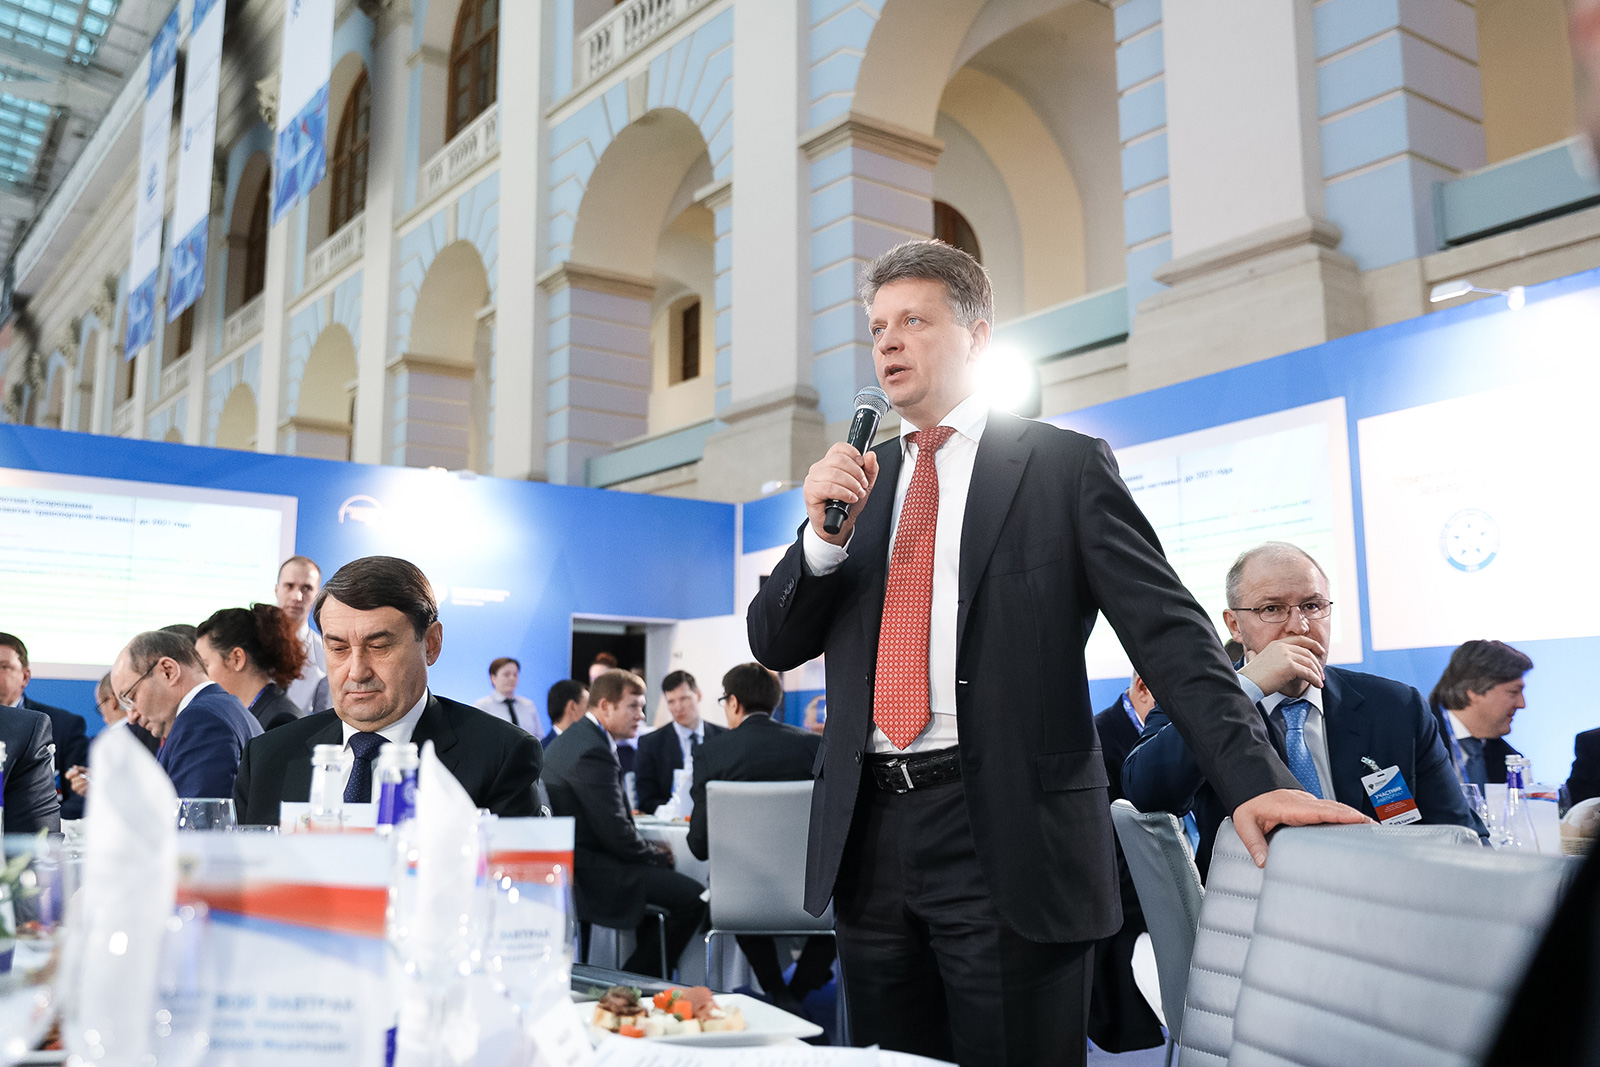 The Business breakfast by the Minister of Transport of the Russian Federation was held at the forum “Transport of Russia”